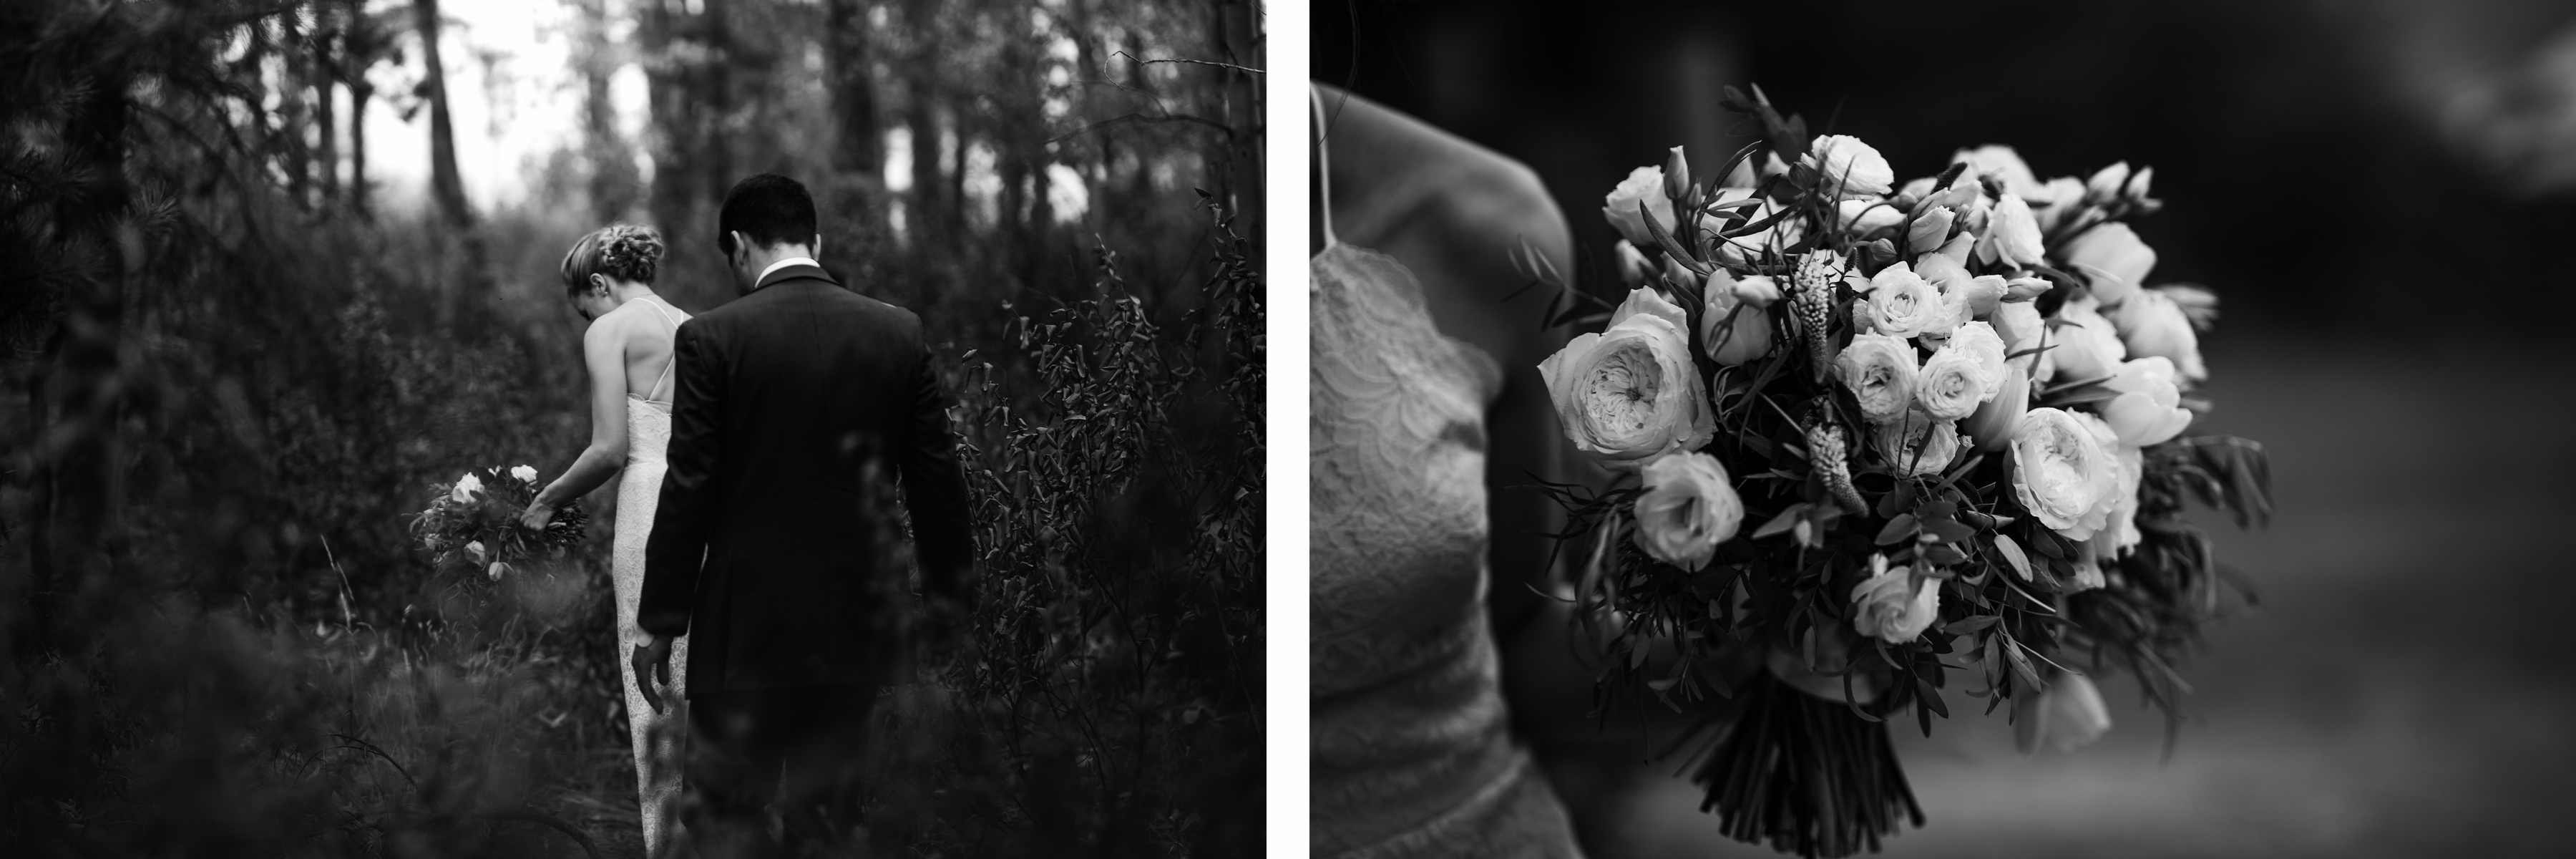 Calgary wedding photographer at Canmore and Banff destination elopement wedding in rocky mountains, Alberta, Canada - Photo 32